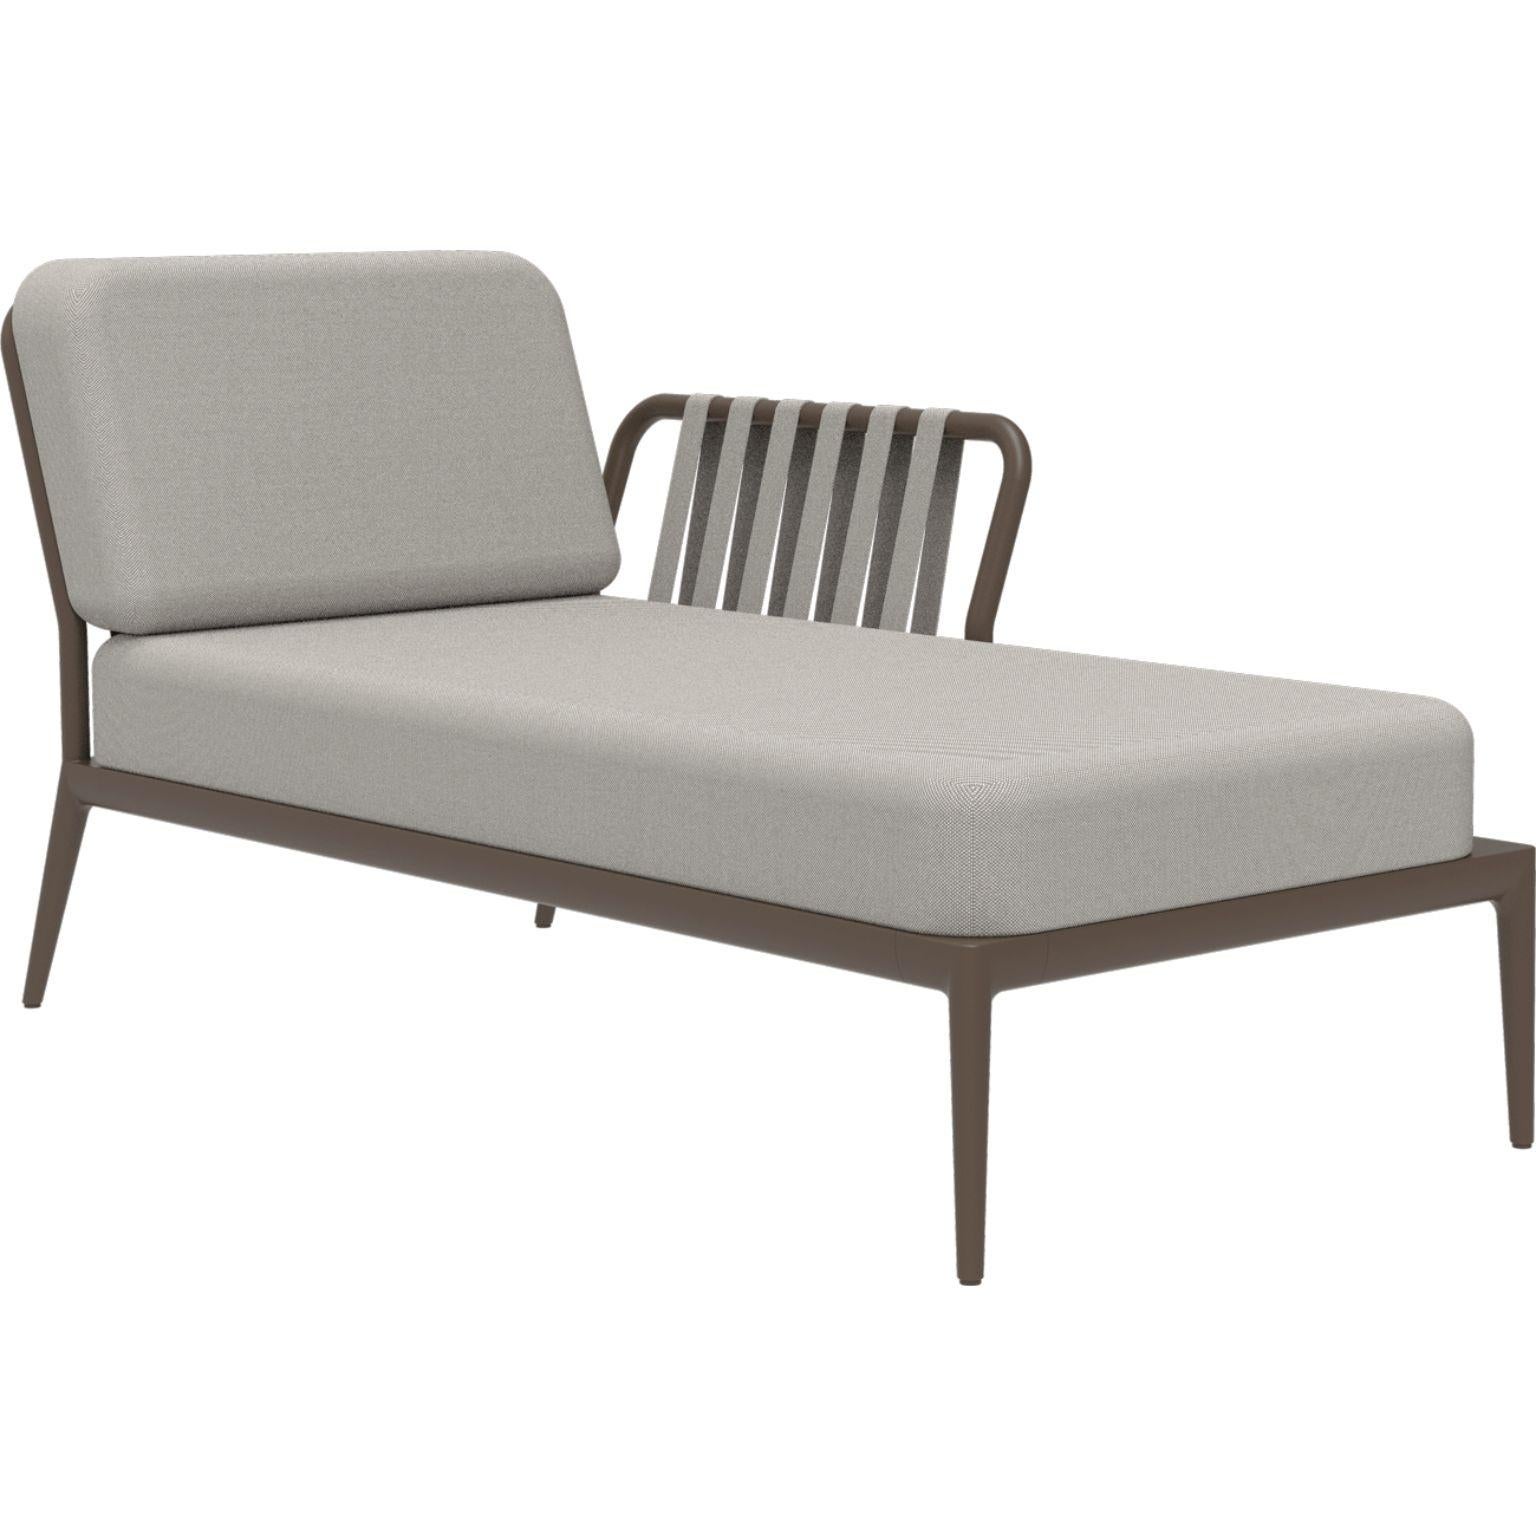 Ribbons bronze right chaise longue by MOWEE
Dimensions: D80 x W155 x H81 cm
Material: Aluminium, Upholstery
Weight: 28 kg
Also Available in different colours and finishes. 

An unmistakable collection for its beauty and robustness. A tribute